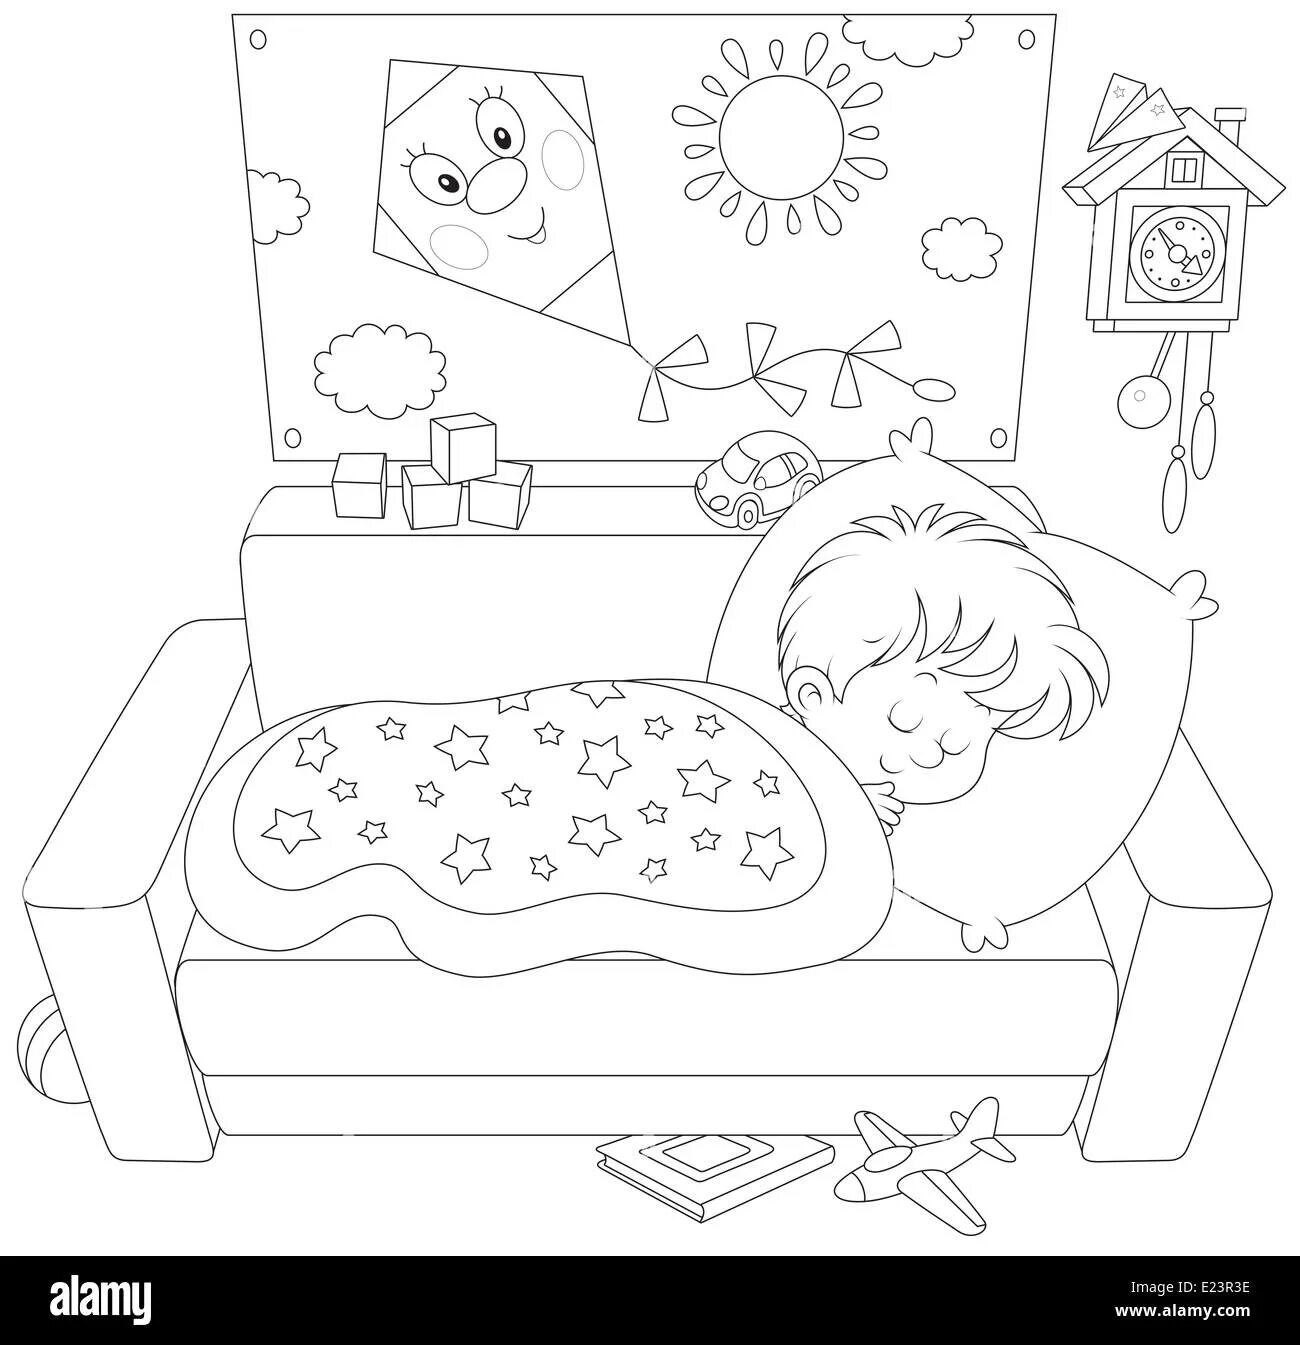 Relaxed sleeping baby coloring book